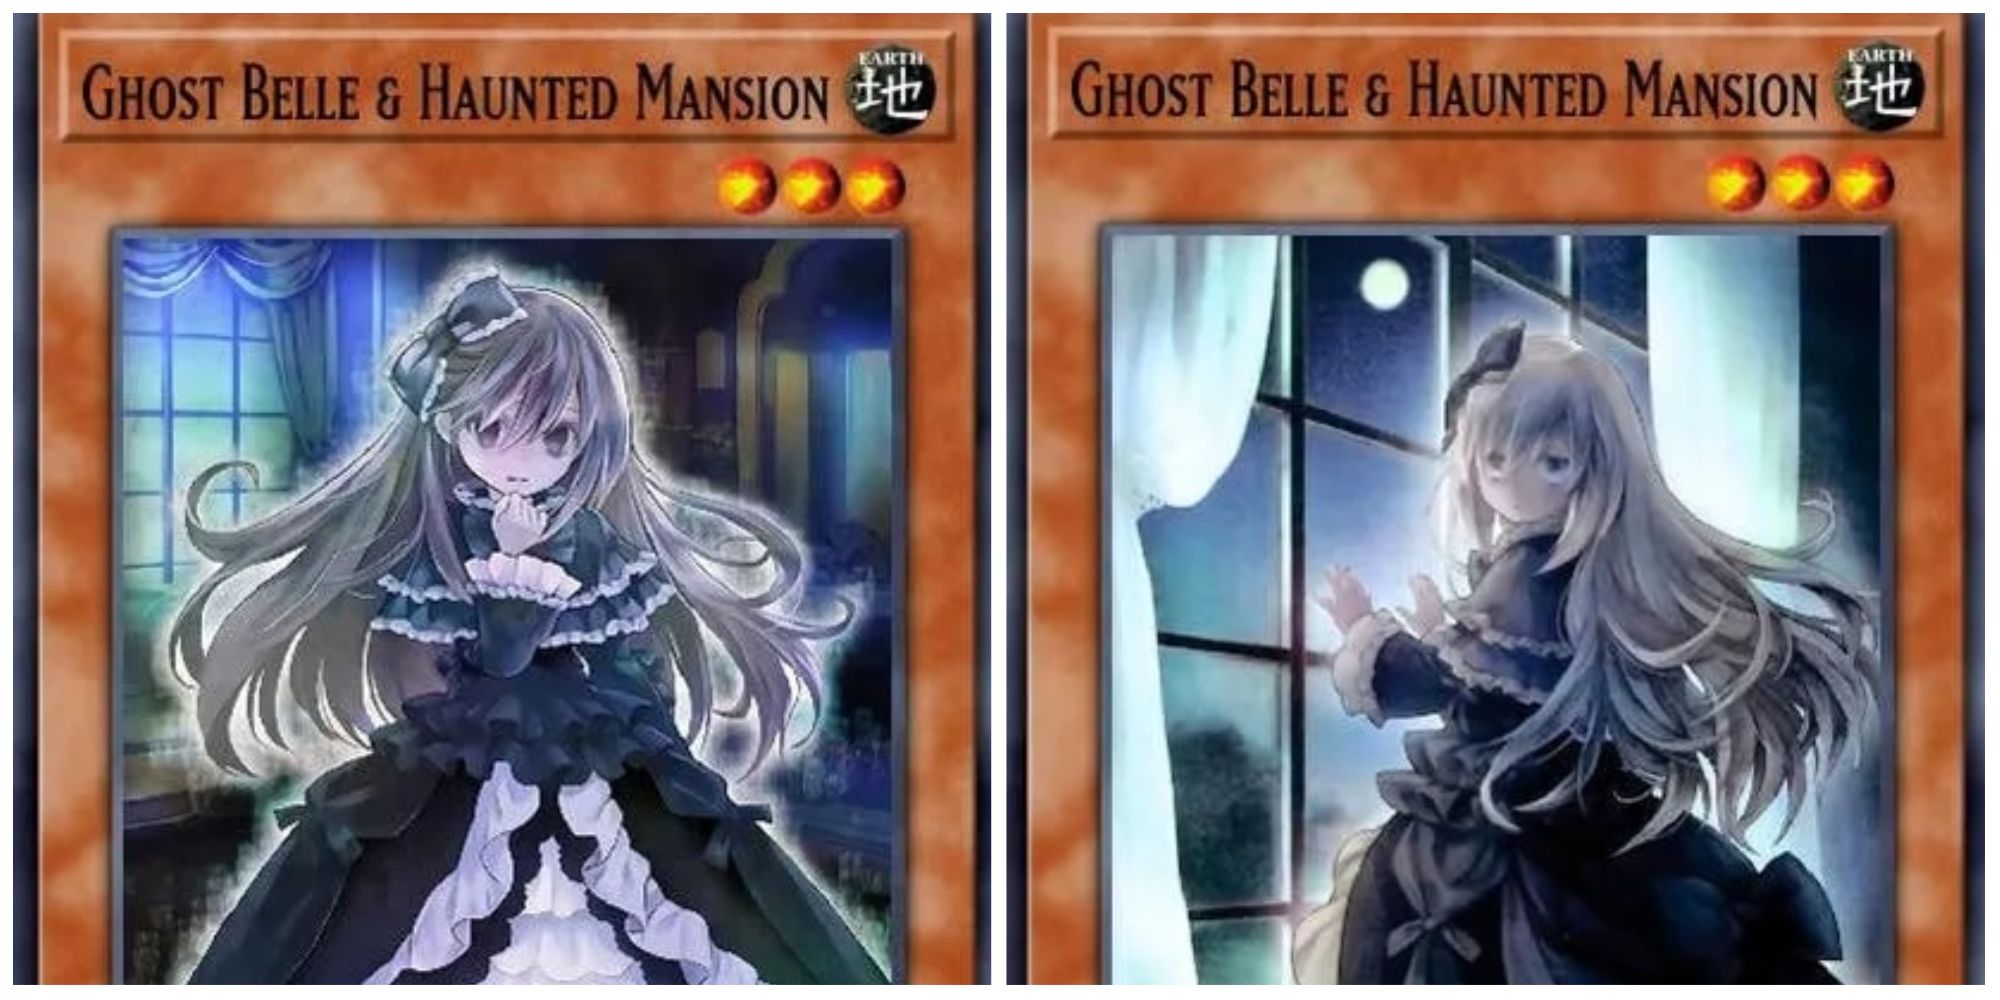 Ghost Belle & Haunted Mansion